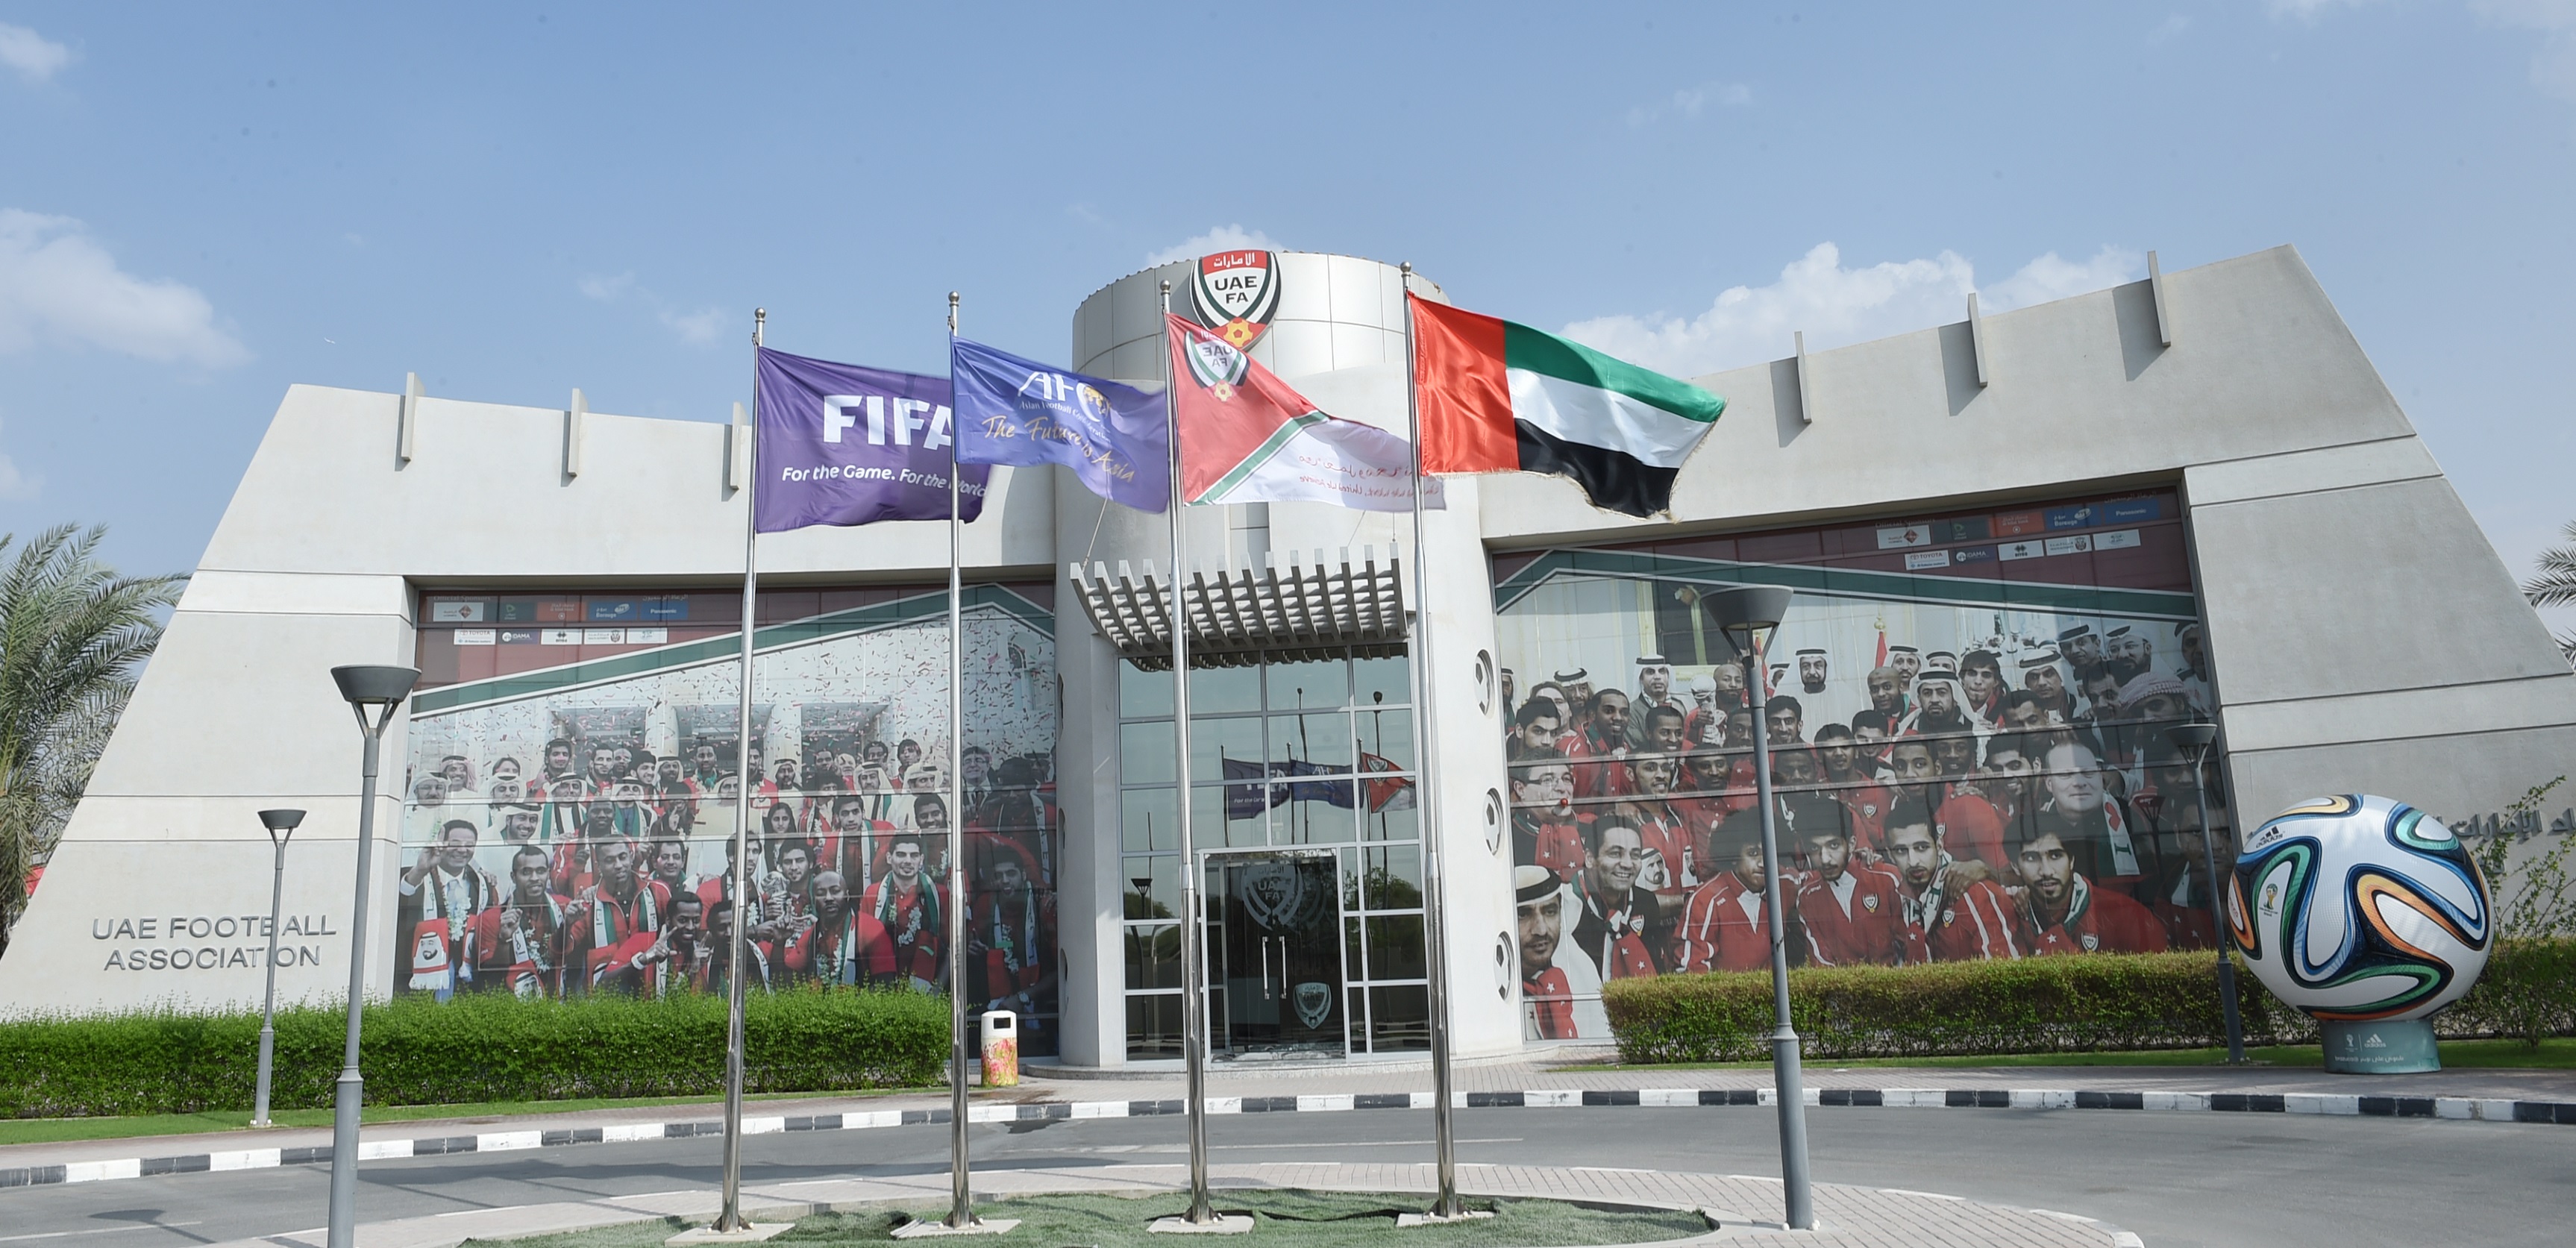 The General Assembly of the Football Association adopts amendments to the election regulations